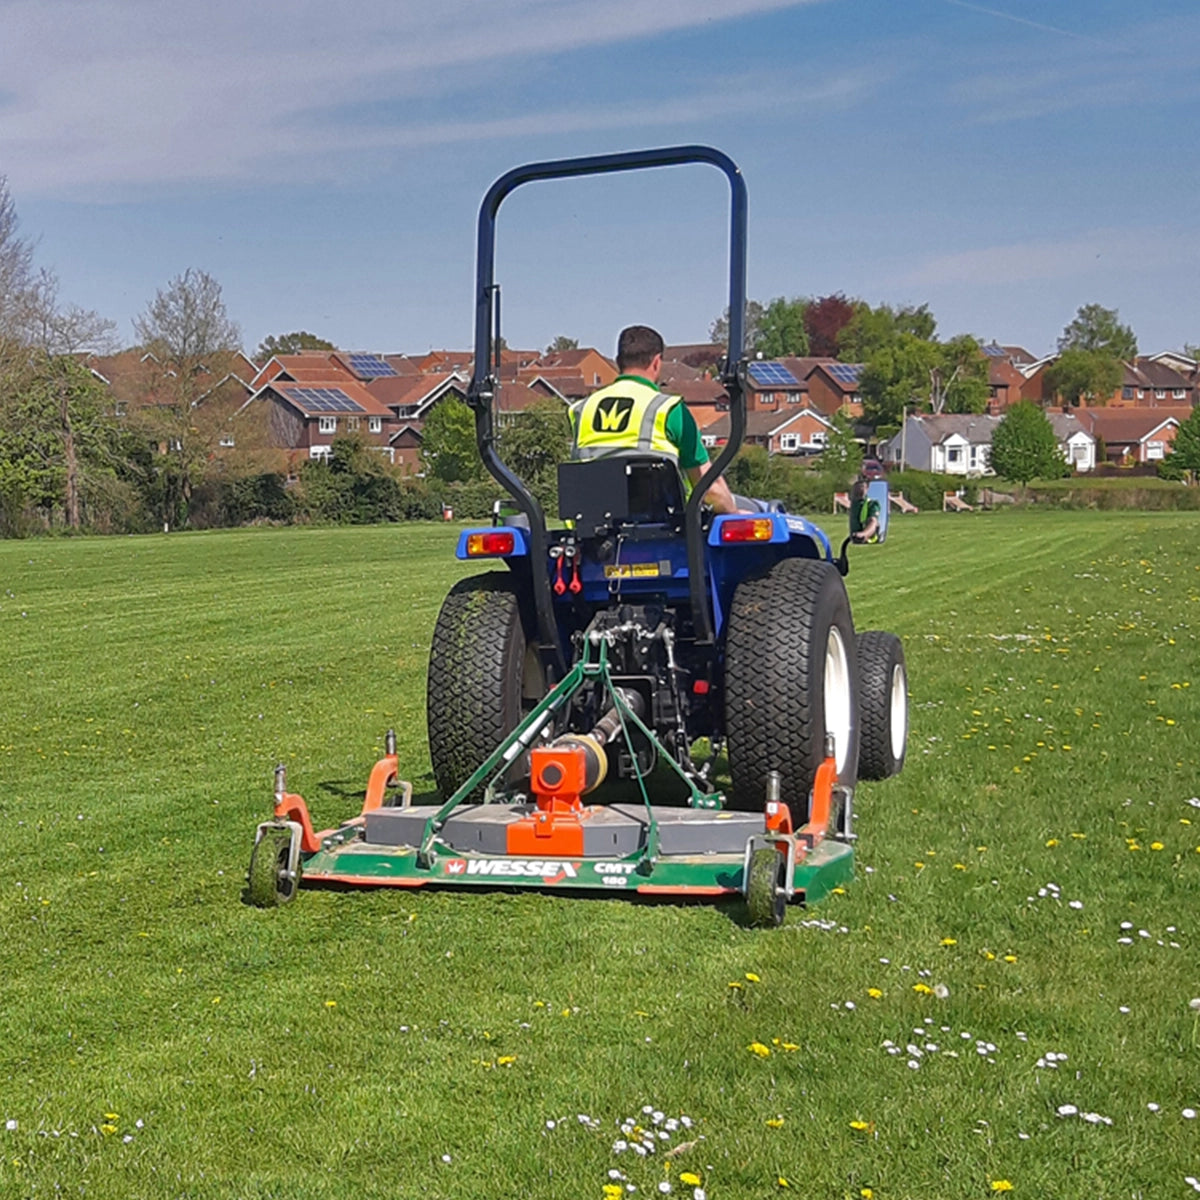 Wessex CMT-150 Finishing Mower